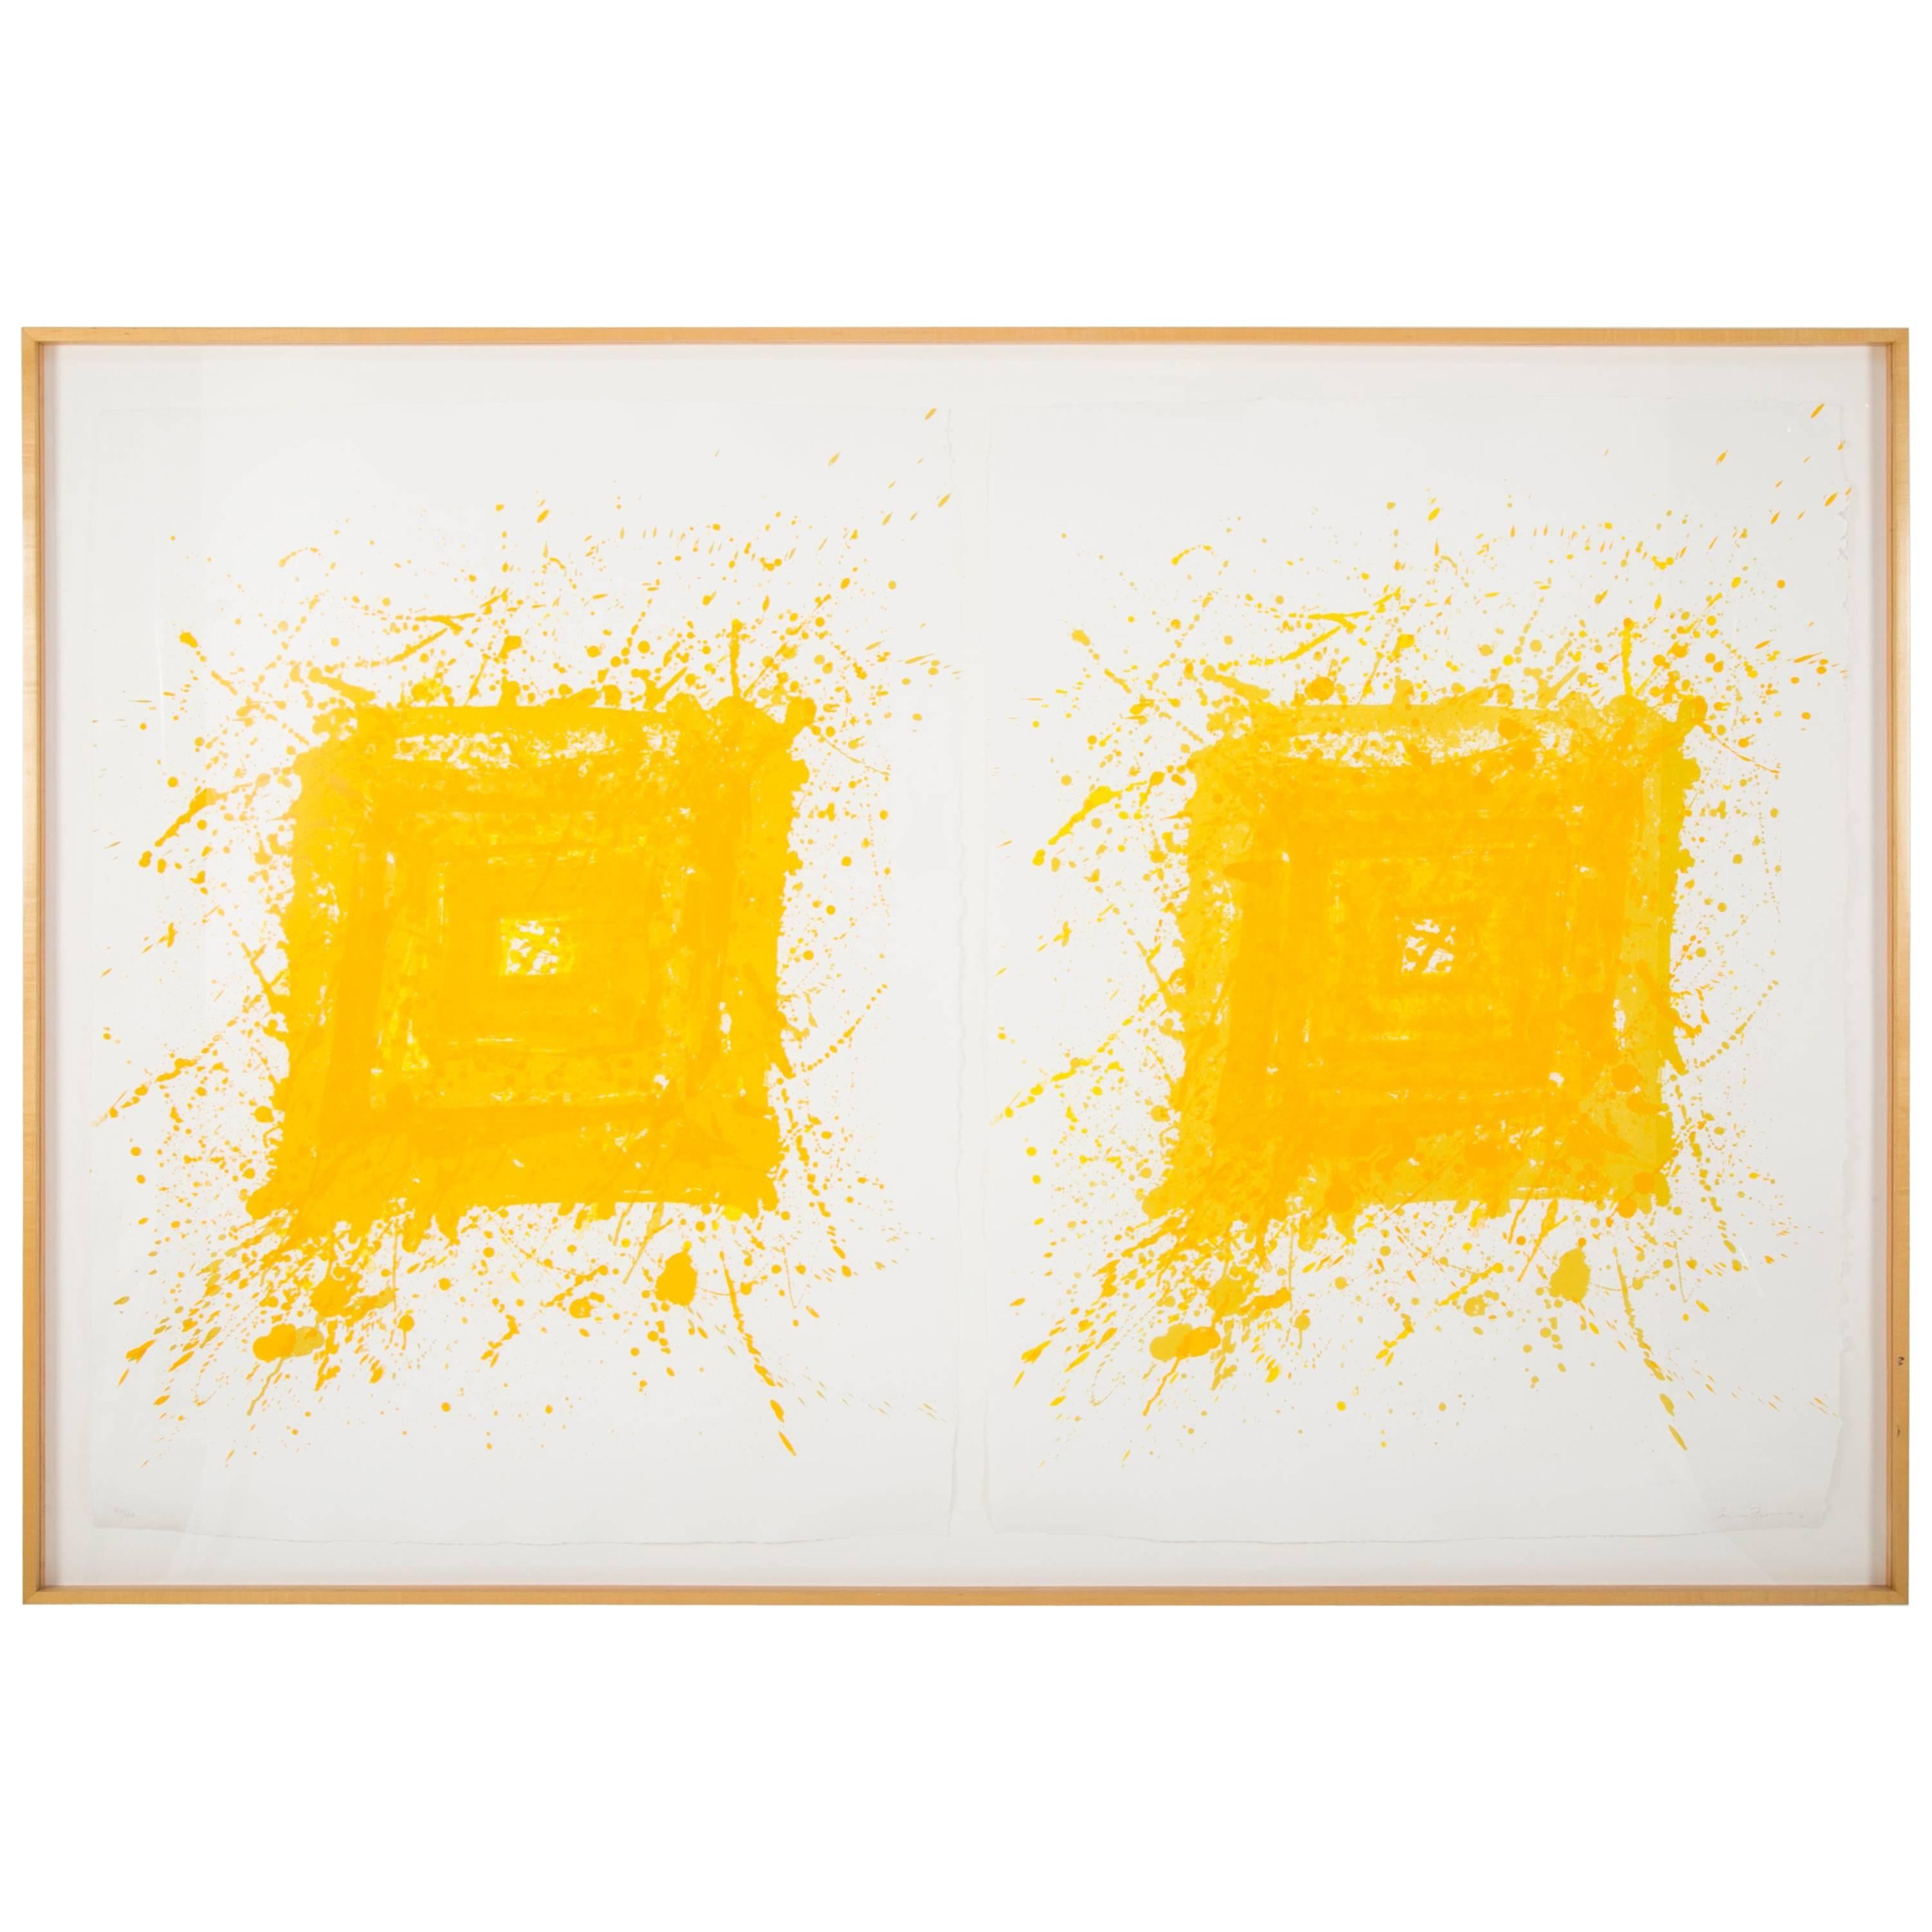 "Generated" Composed of Two Lithographs by Sam Francis Framed in Maple Frame